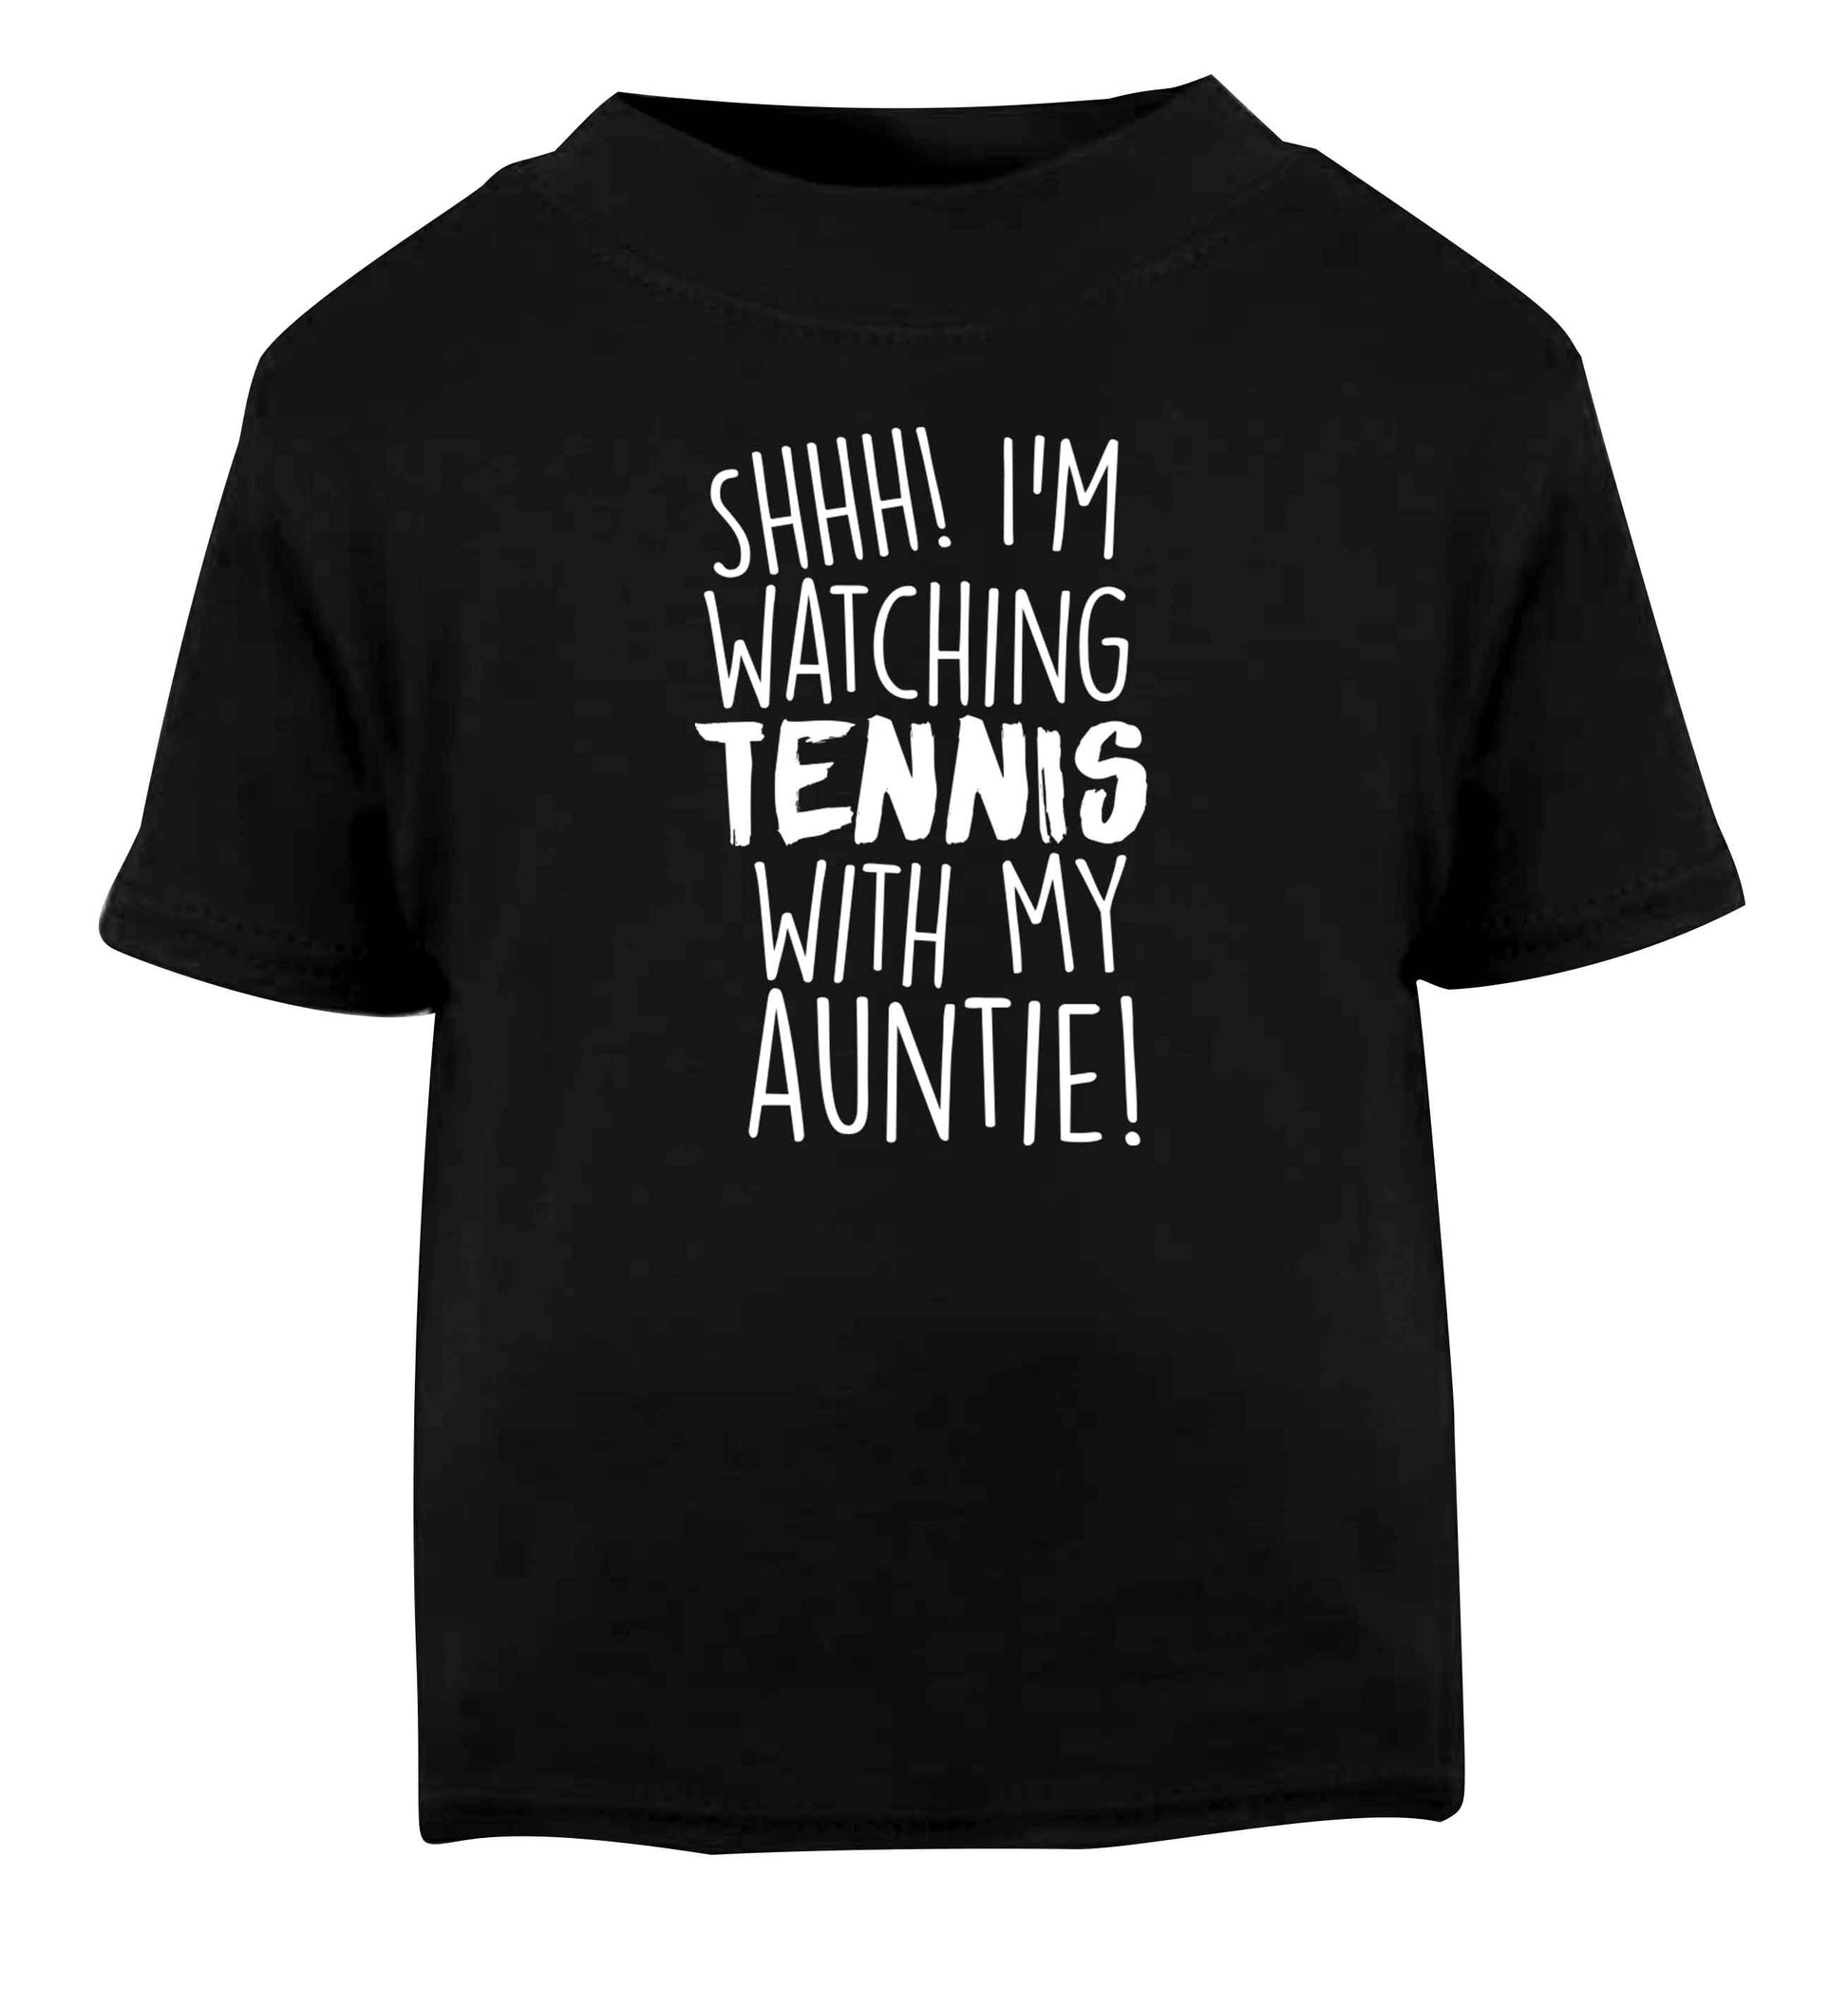 Shh! I'm watching tennis with my auntie! Black Baby Toddler Tshirt 2 years